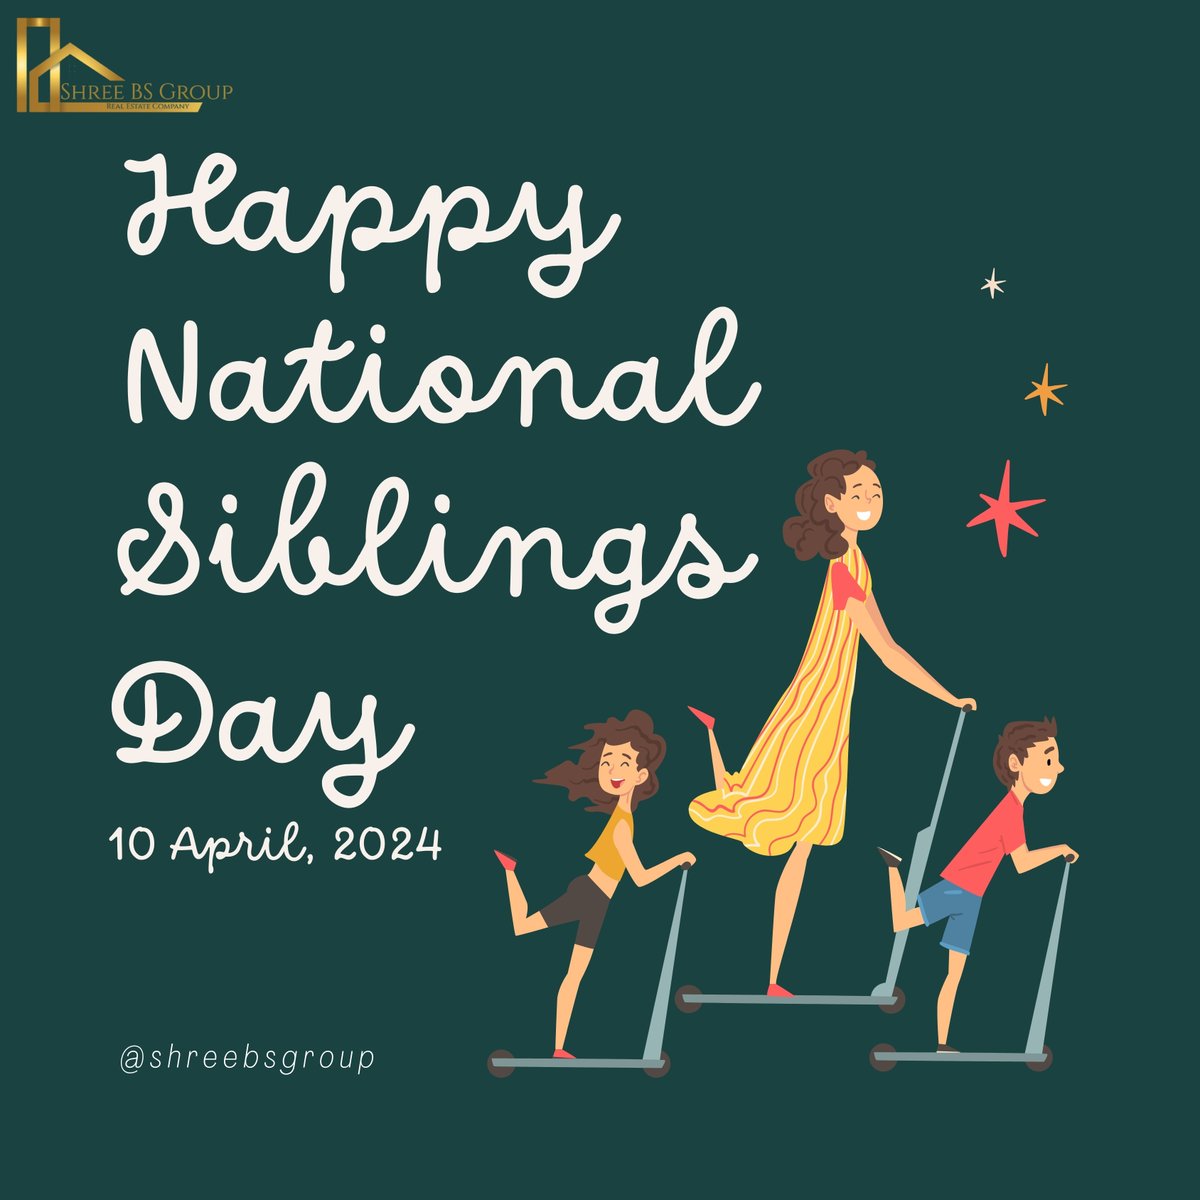 'Built-in best friends since day one. Here's to the ones who share our laughter, wipe our tears, and make every moment brighter. Happy National Sibling Day! 
.
.
 #SiblingBond #UnbreakableConnection'